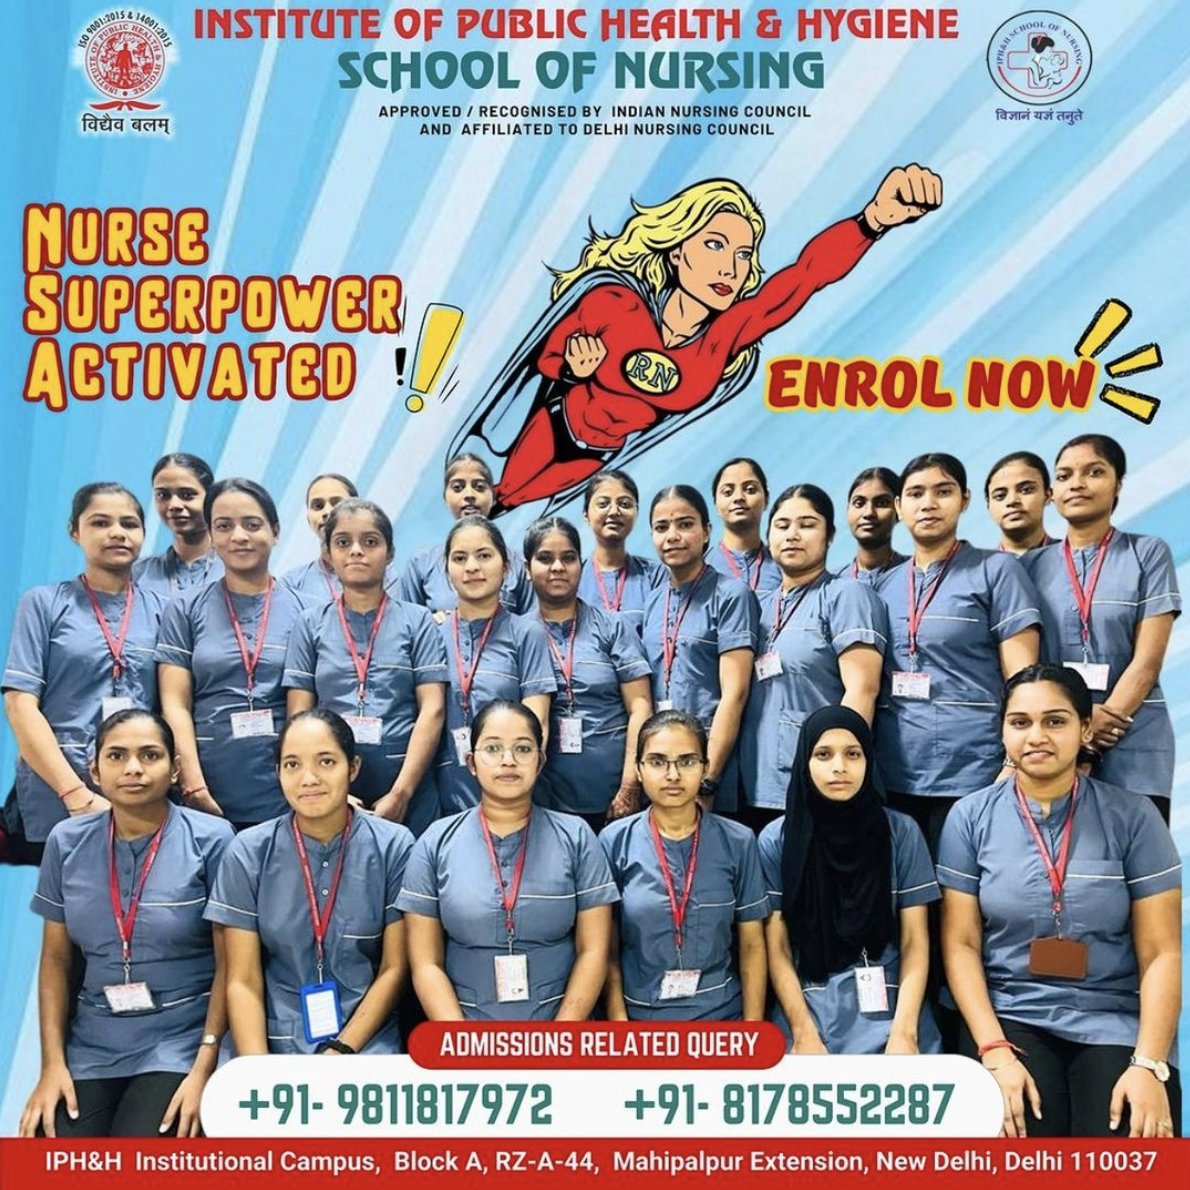 💪 Nurse Superpower Activated
🌈  Nurses have this amazing ability to infuse every moment with genuine care and empathy. 
iphhparamedic.in
👩‍⚕️👨‍⚕️ #NursePower #Gratitude #HealthcareMagic #IPHHDelhi #GNM #ANM